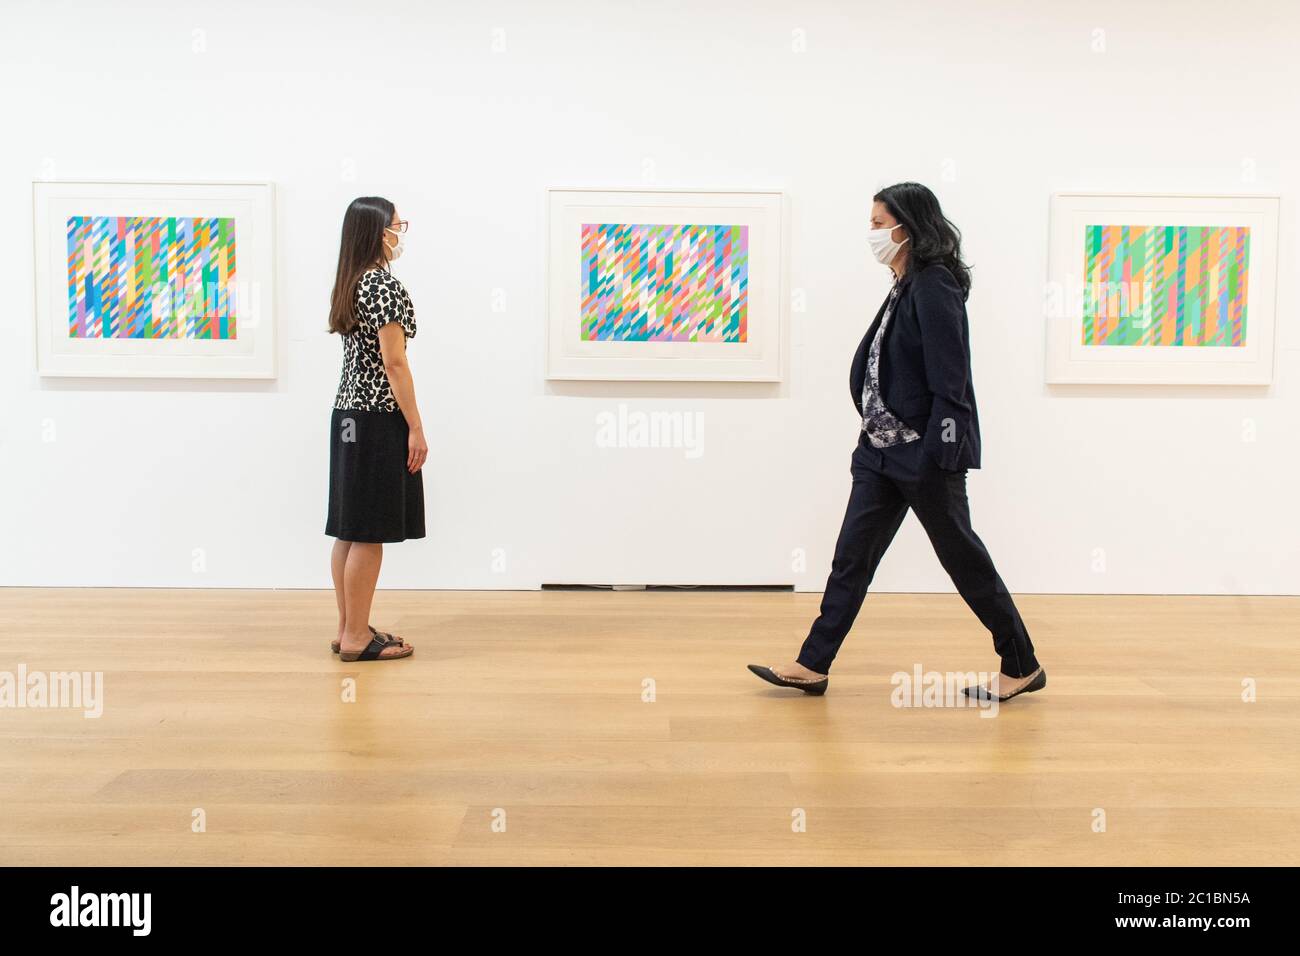 Sara Chan (left) and Angela Choon view artworks by Bridget Riley at the David Zwirner modern art gallery in Mayfair, London as non-essential shops in England open their doors to customers for the first time since coronavirus lockdown restrictions were imposed in March. Stock Photo